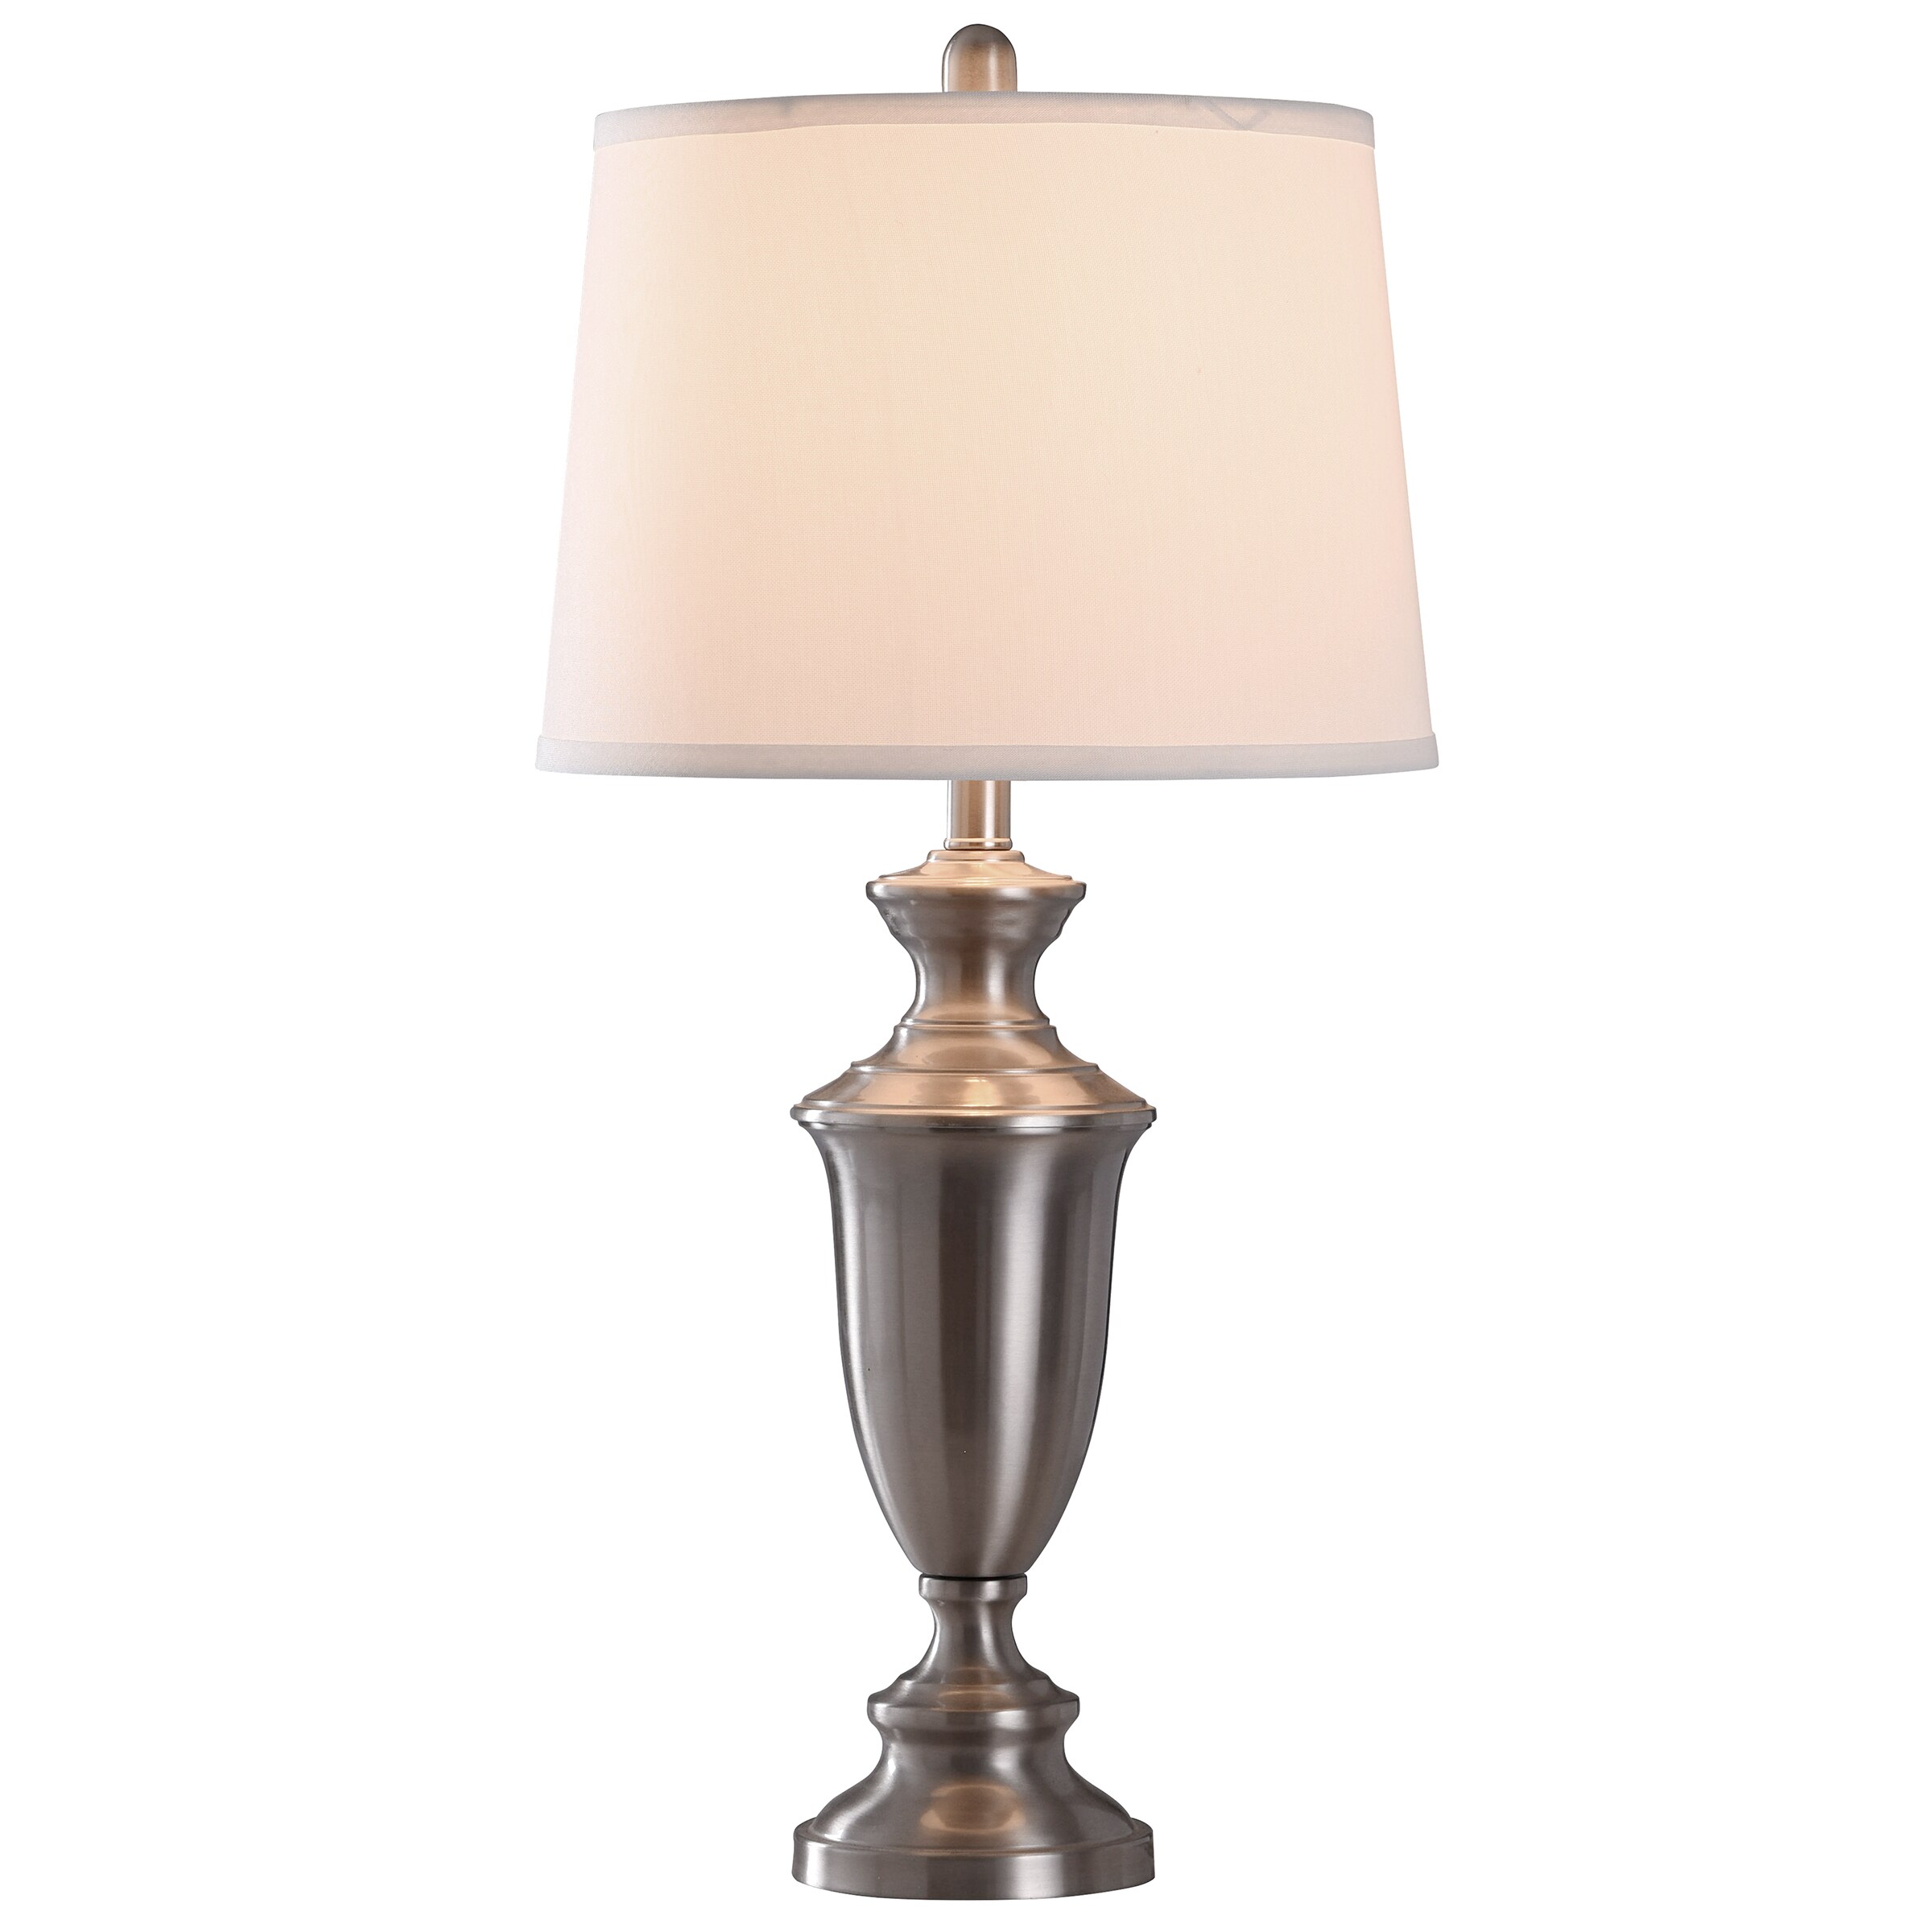 StyleCraft Home Collection 30-in Brush Nickel 3-Way Table Lamp 